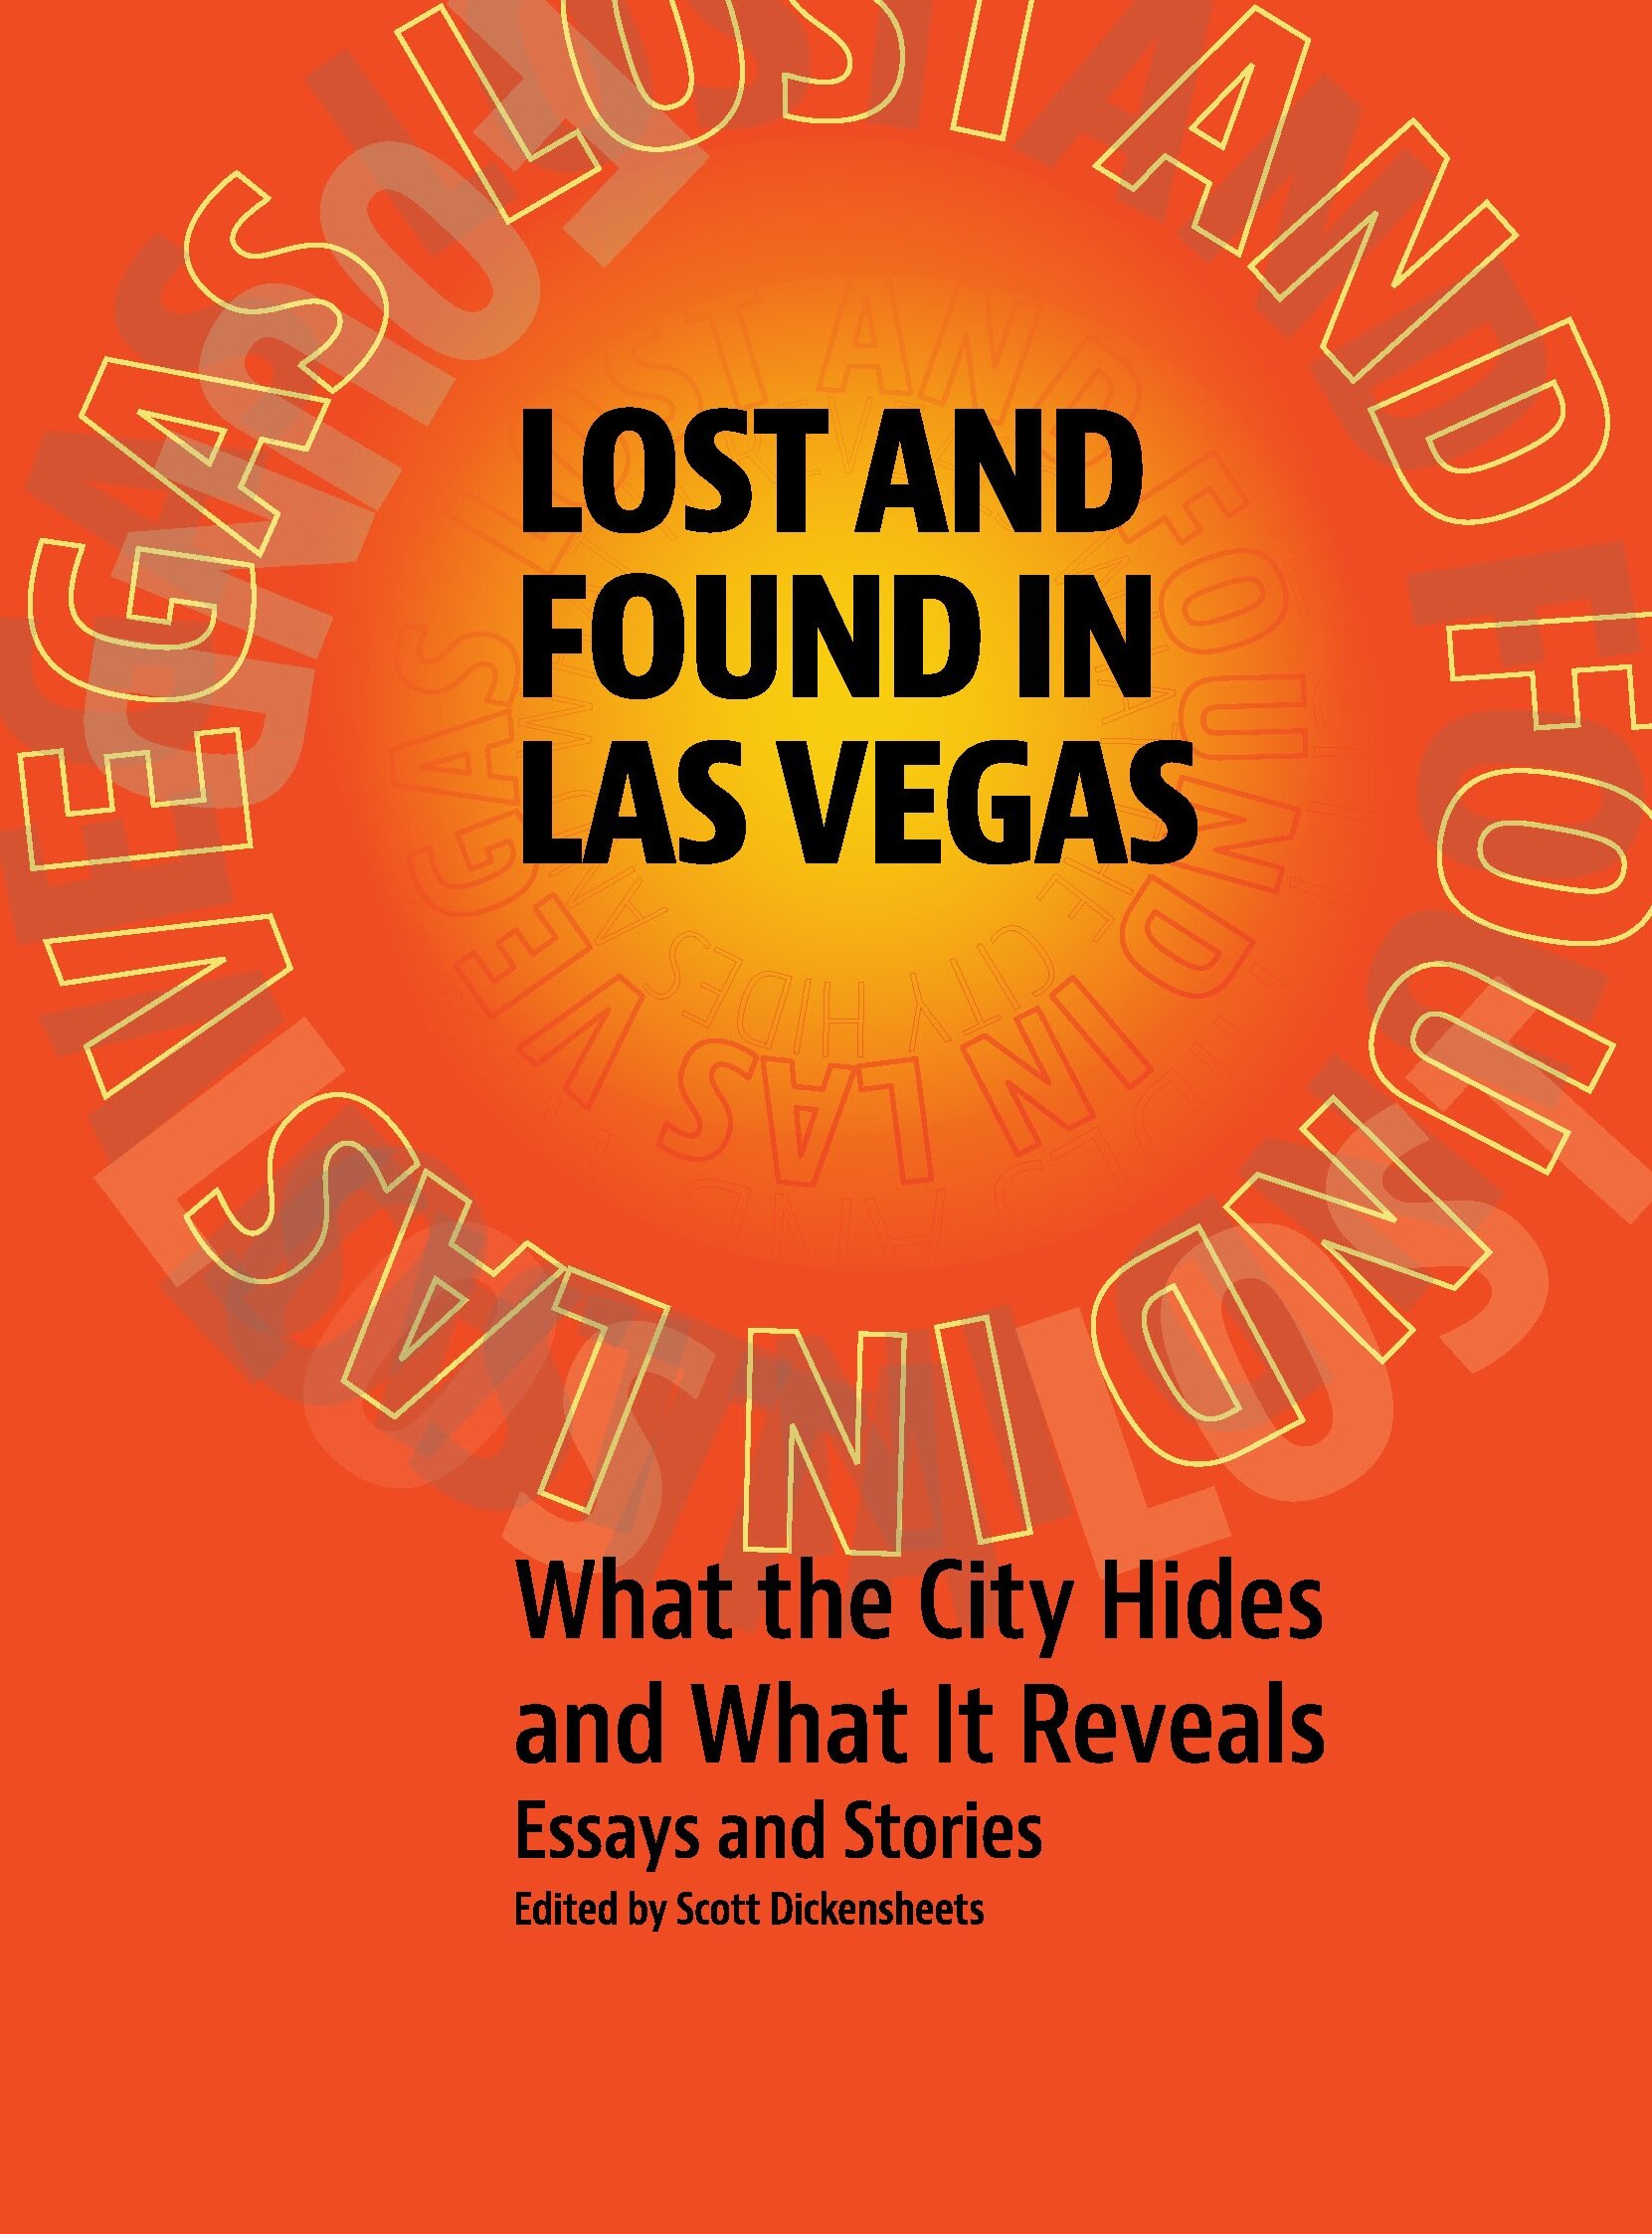 Lost and Found Las Vegas Writes Cover_2014.jpg